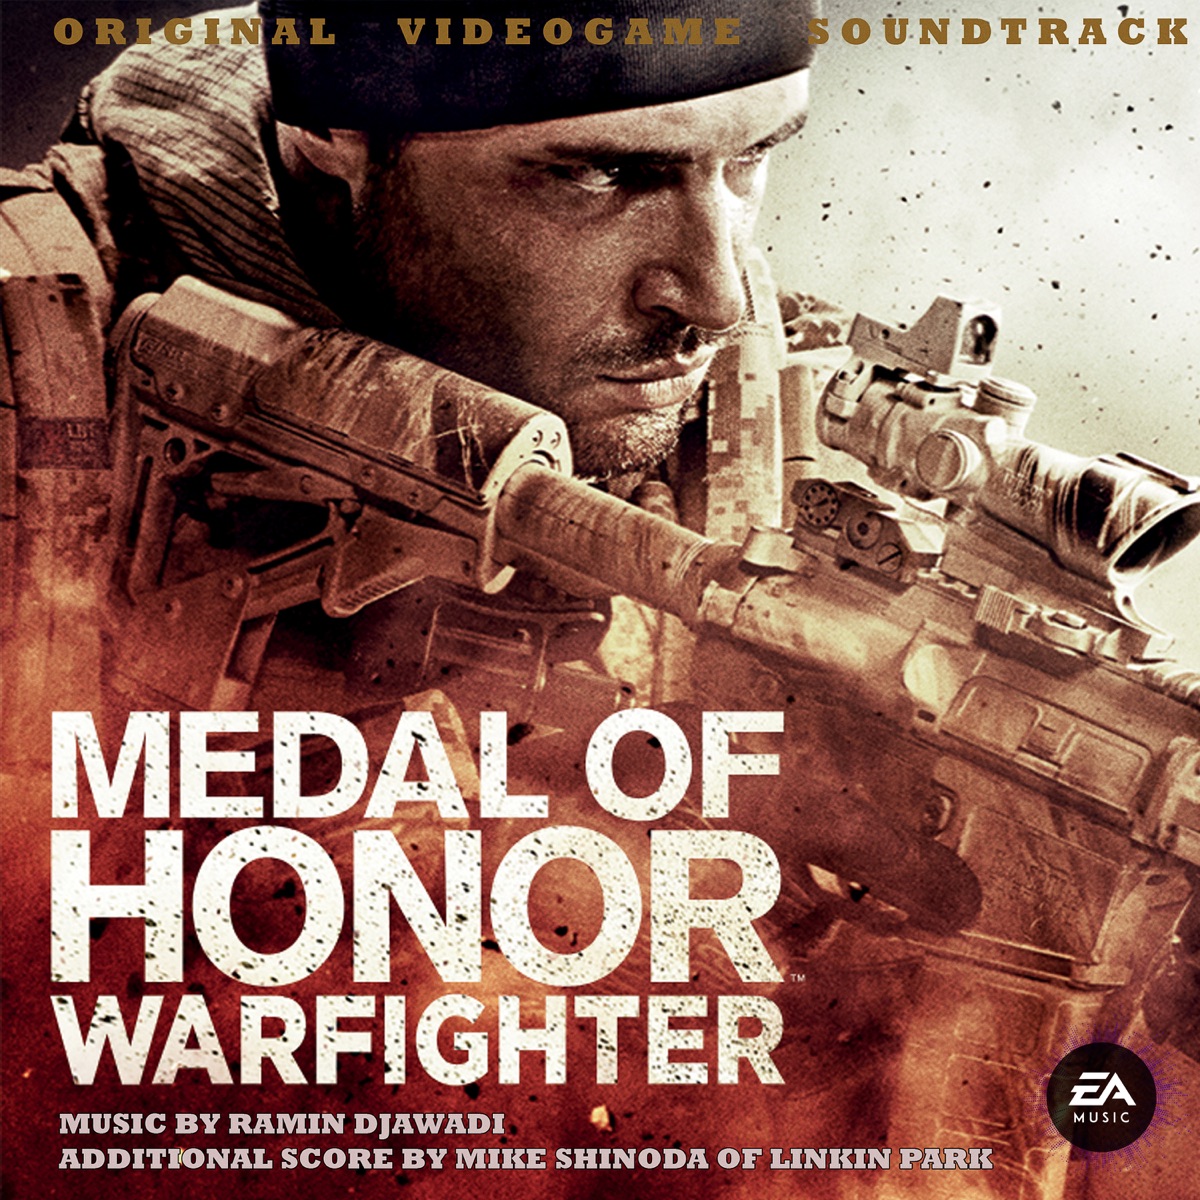 MEDAL OF HONOR: ORIGINAL SCORE FROM THE DOCUMENTARY SERIES - Music